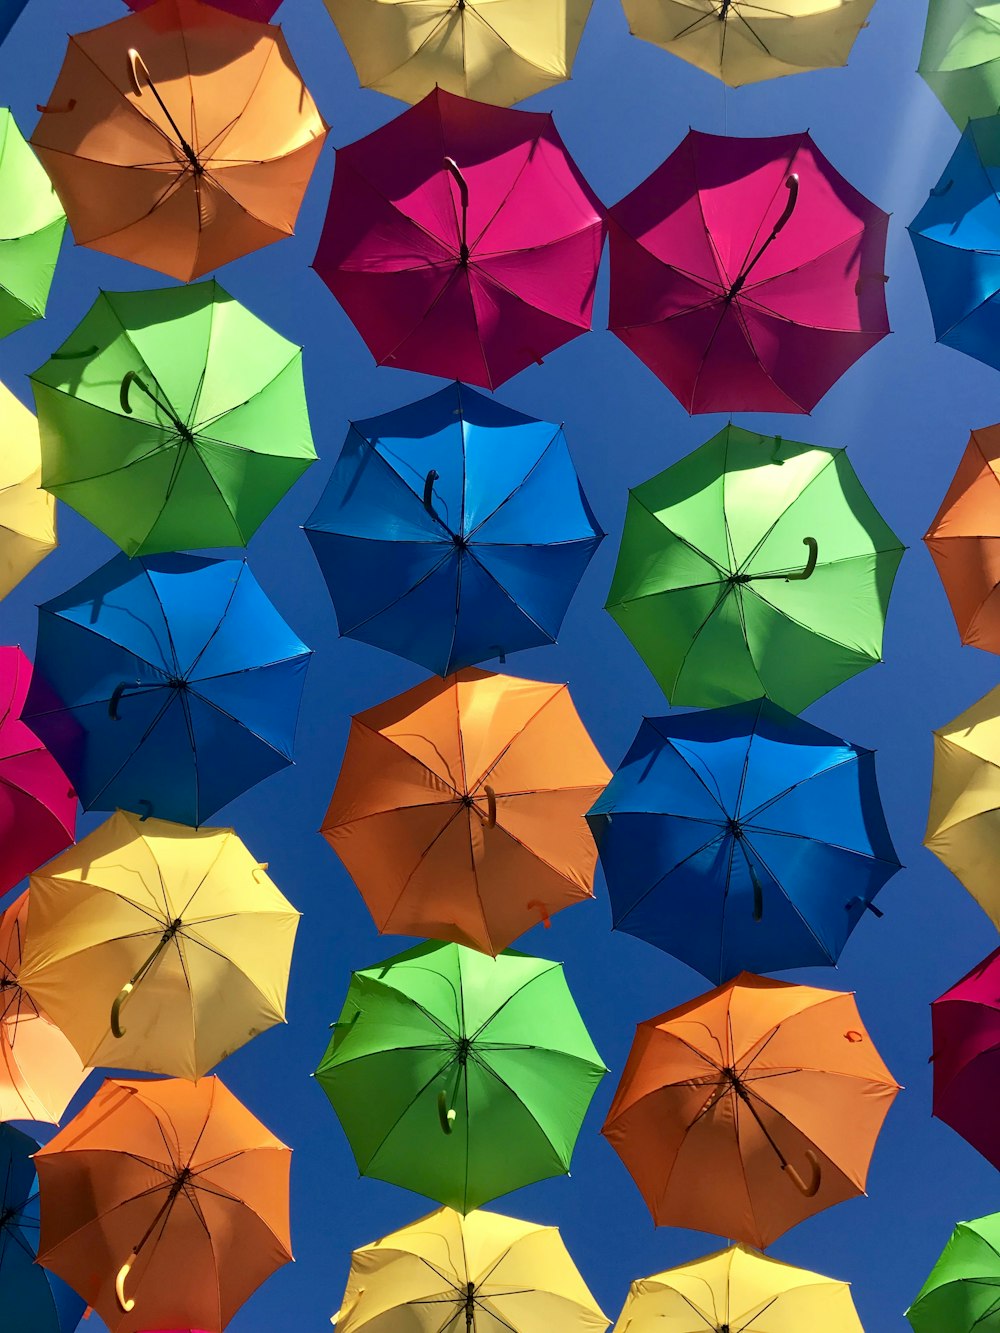 Colorful Umbrella Pictures Download Free Images On Unsplash